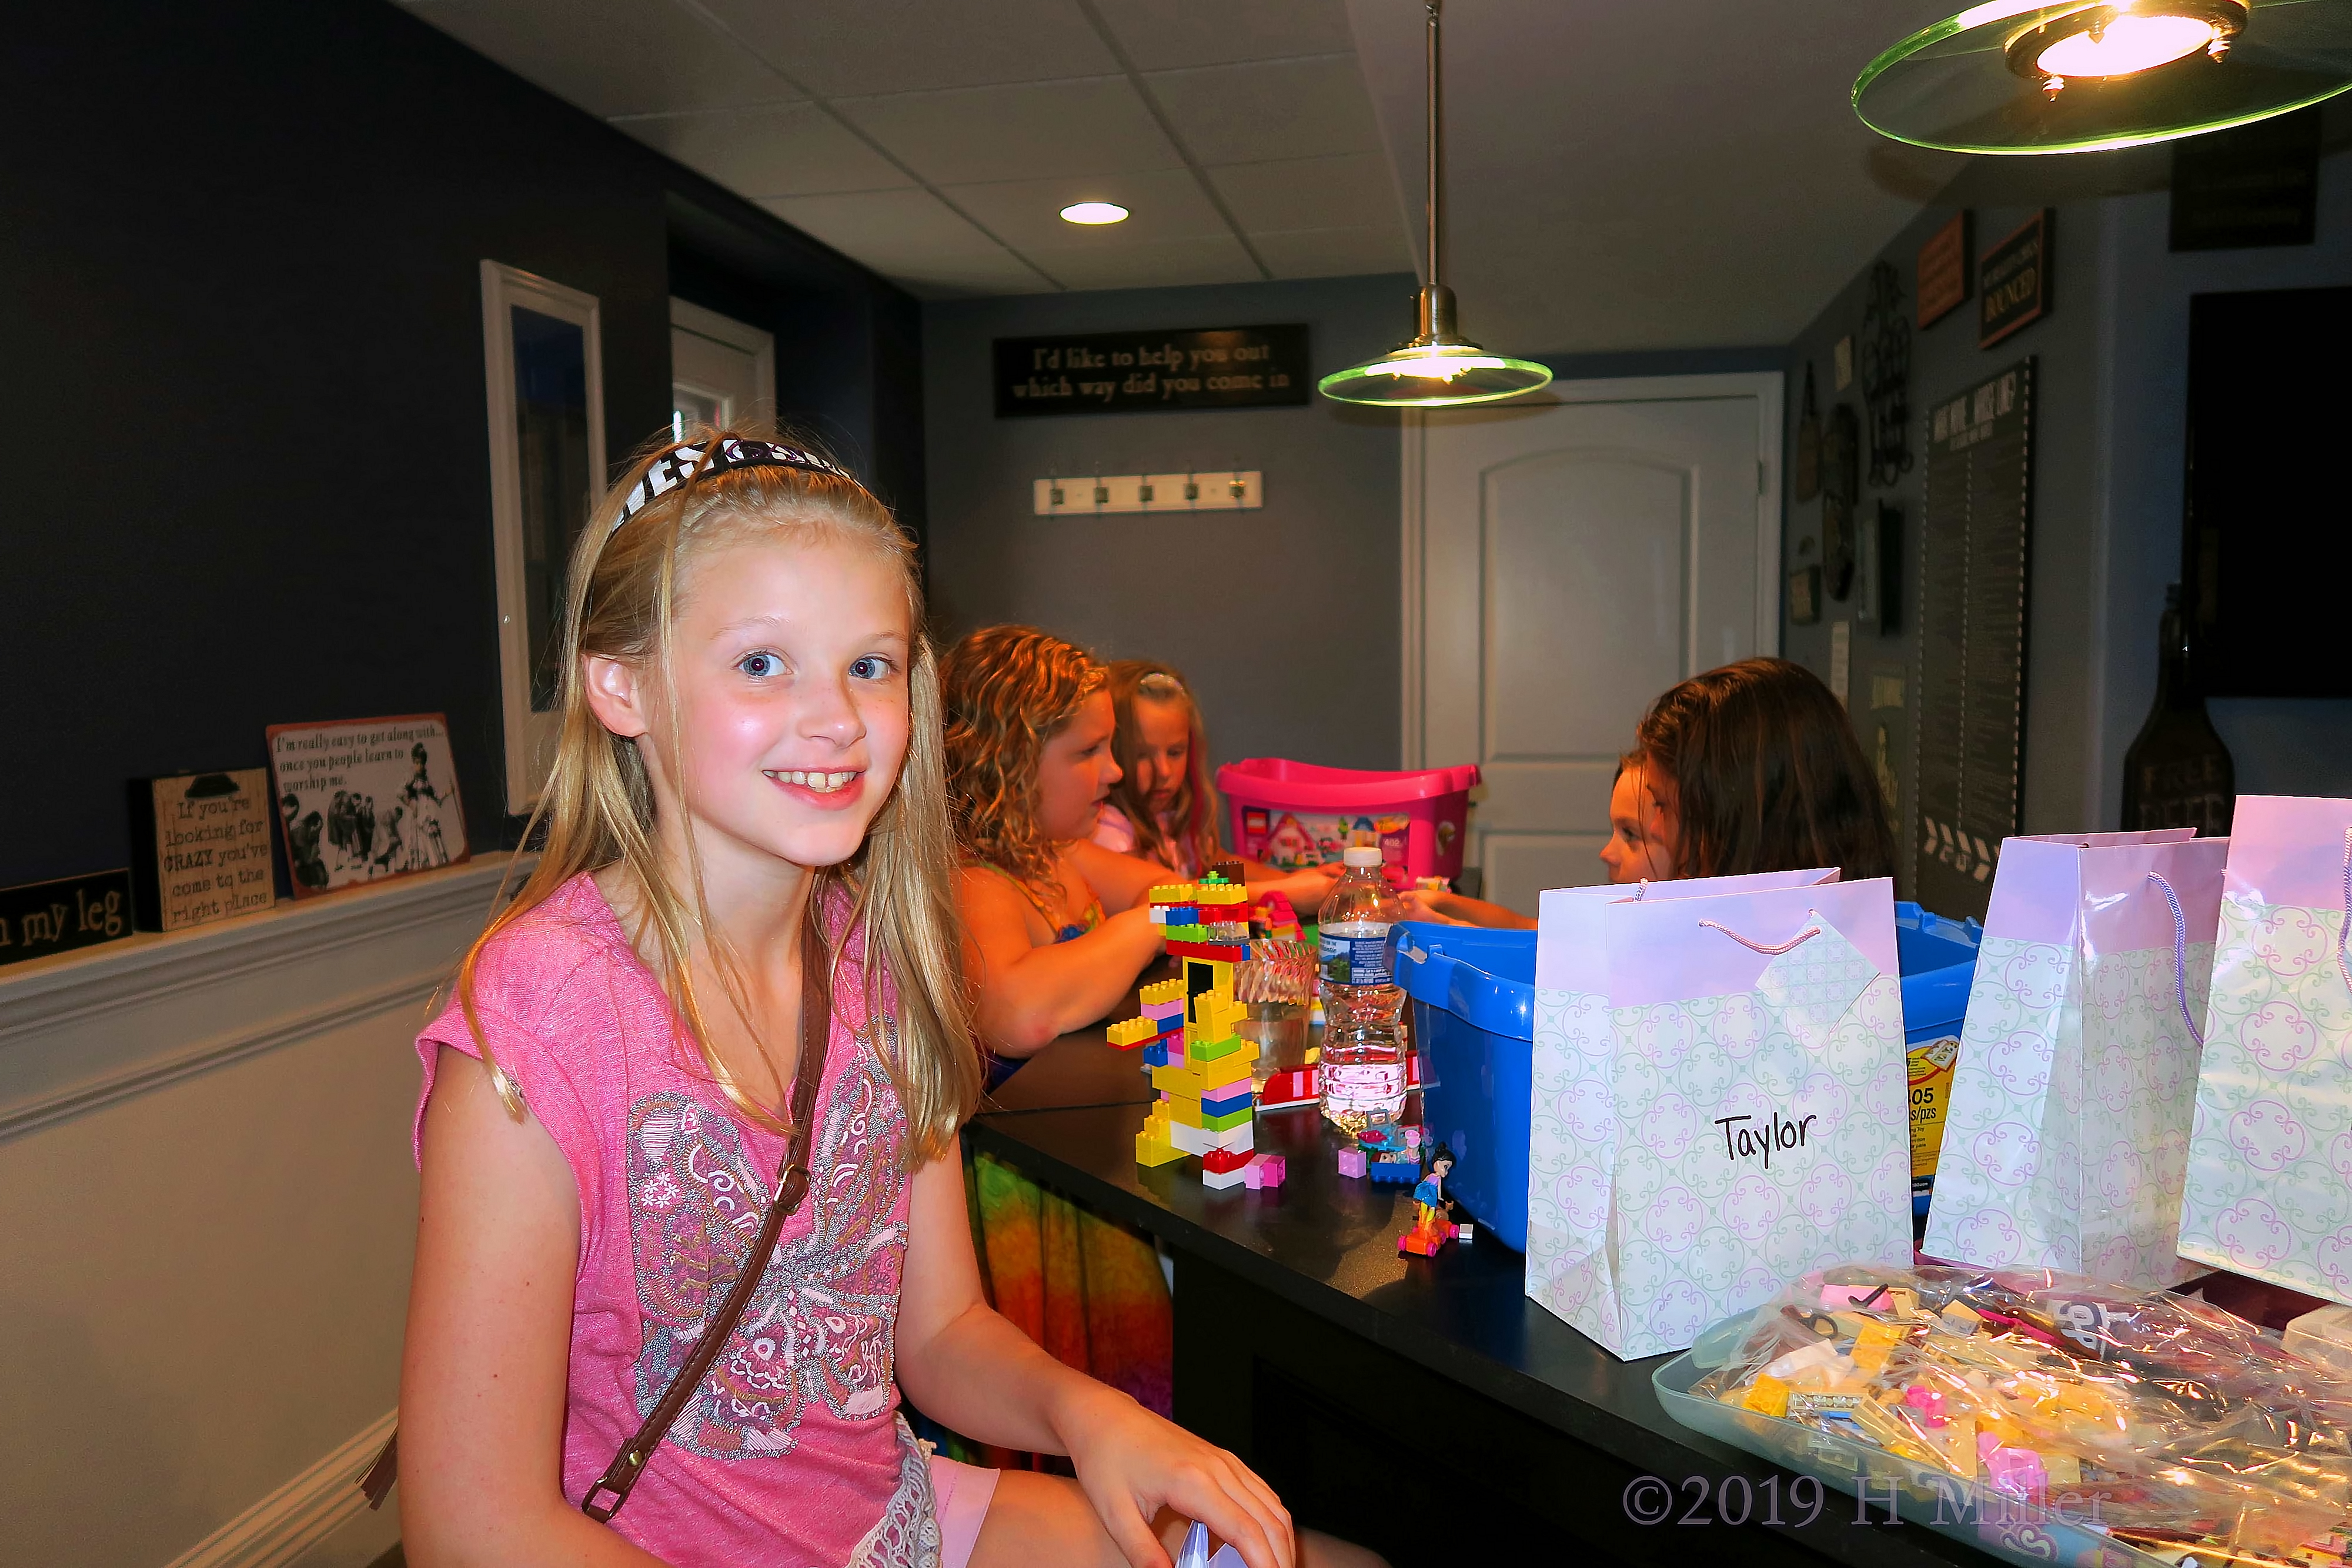 Smiling At The Kids Play Table At The Spa For Girls! 4